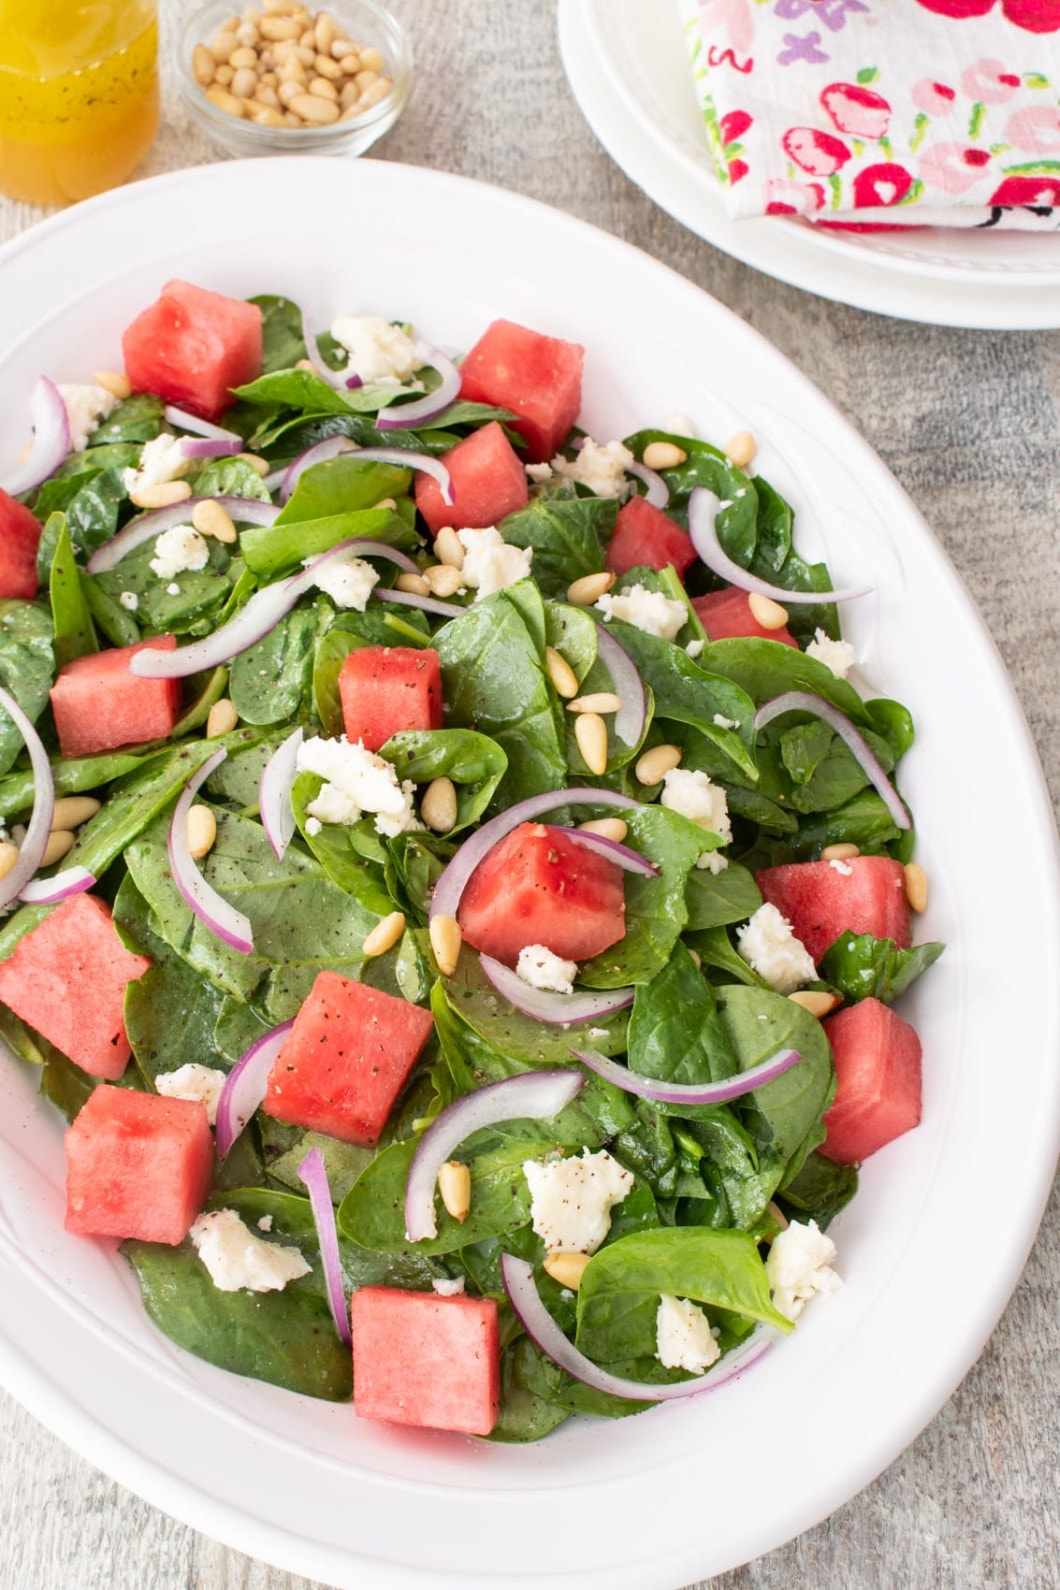 Spinach Salad with Watermelon and Feta